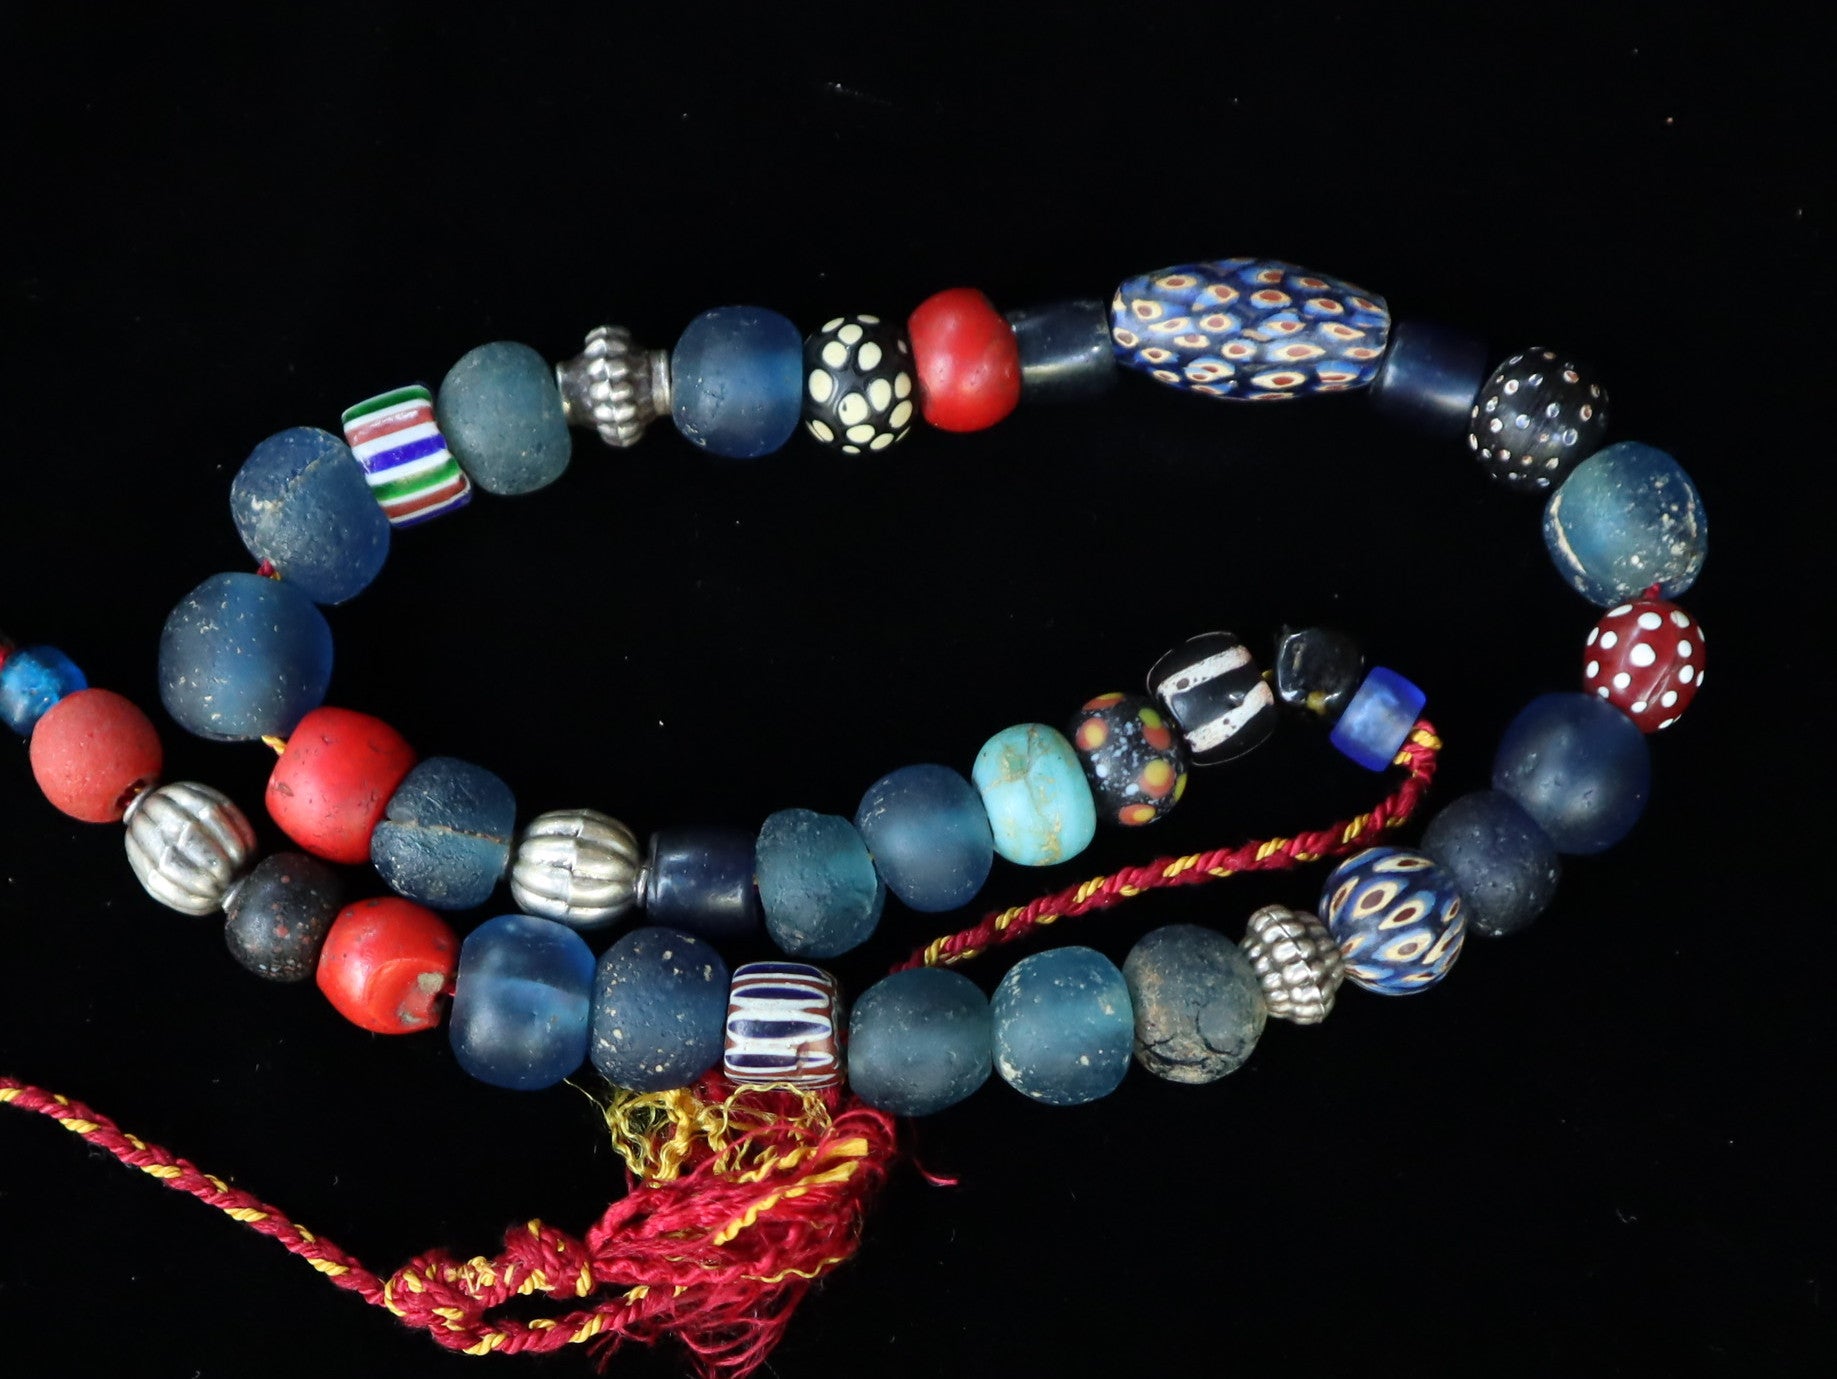 Strand Vintage Small Glass Pirate Trade Beads (200-400 Yrs) , Historic  Beads